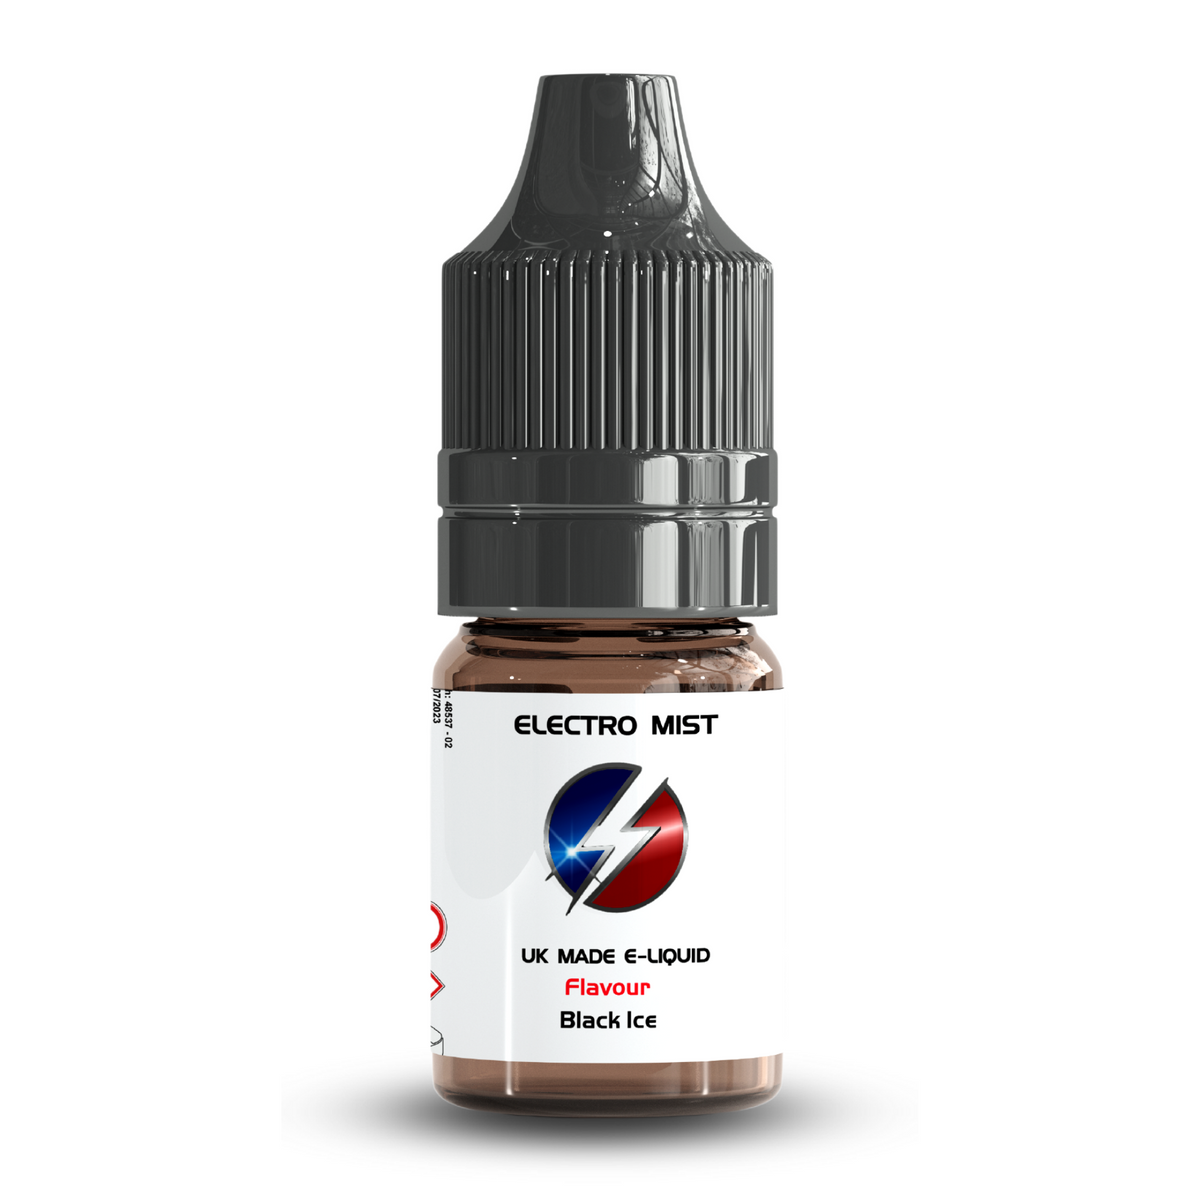 Electromist, the e-liquid brand you can trust. Get your taste buds ready for a flavour sensation, Black Ice. Nicotine Content: 3mg/6mg/12mg. Products may contain nicotine. For over 18s Only ejuice, vape pen, eliquid, e cigarette, 10ml, vaping, cloud, PG, VG, 60/40, vape liquid, Flavour